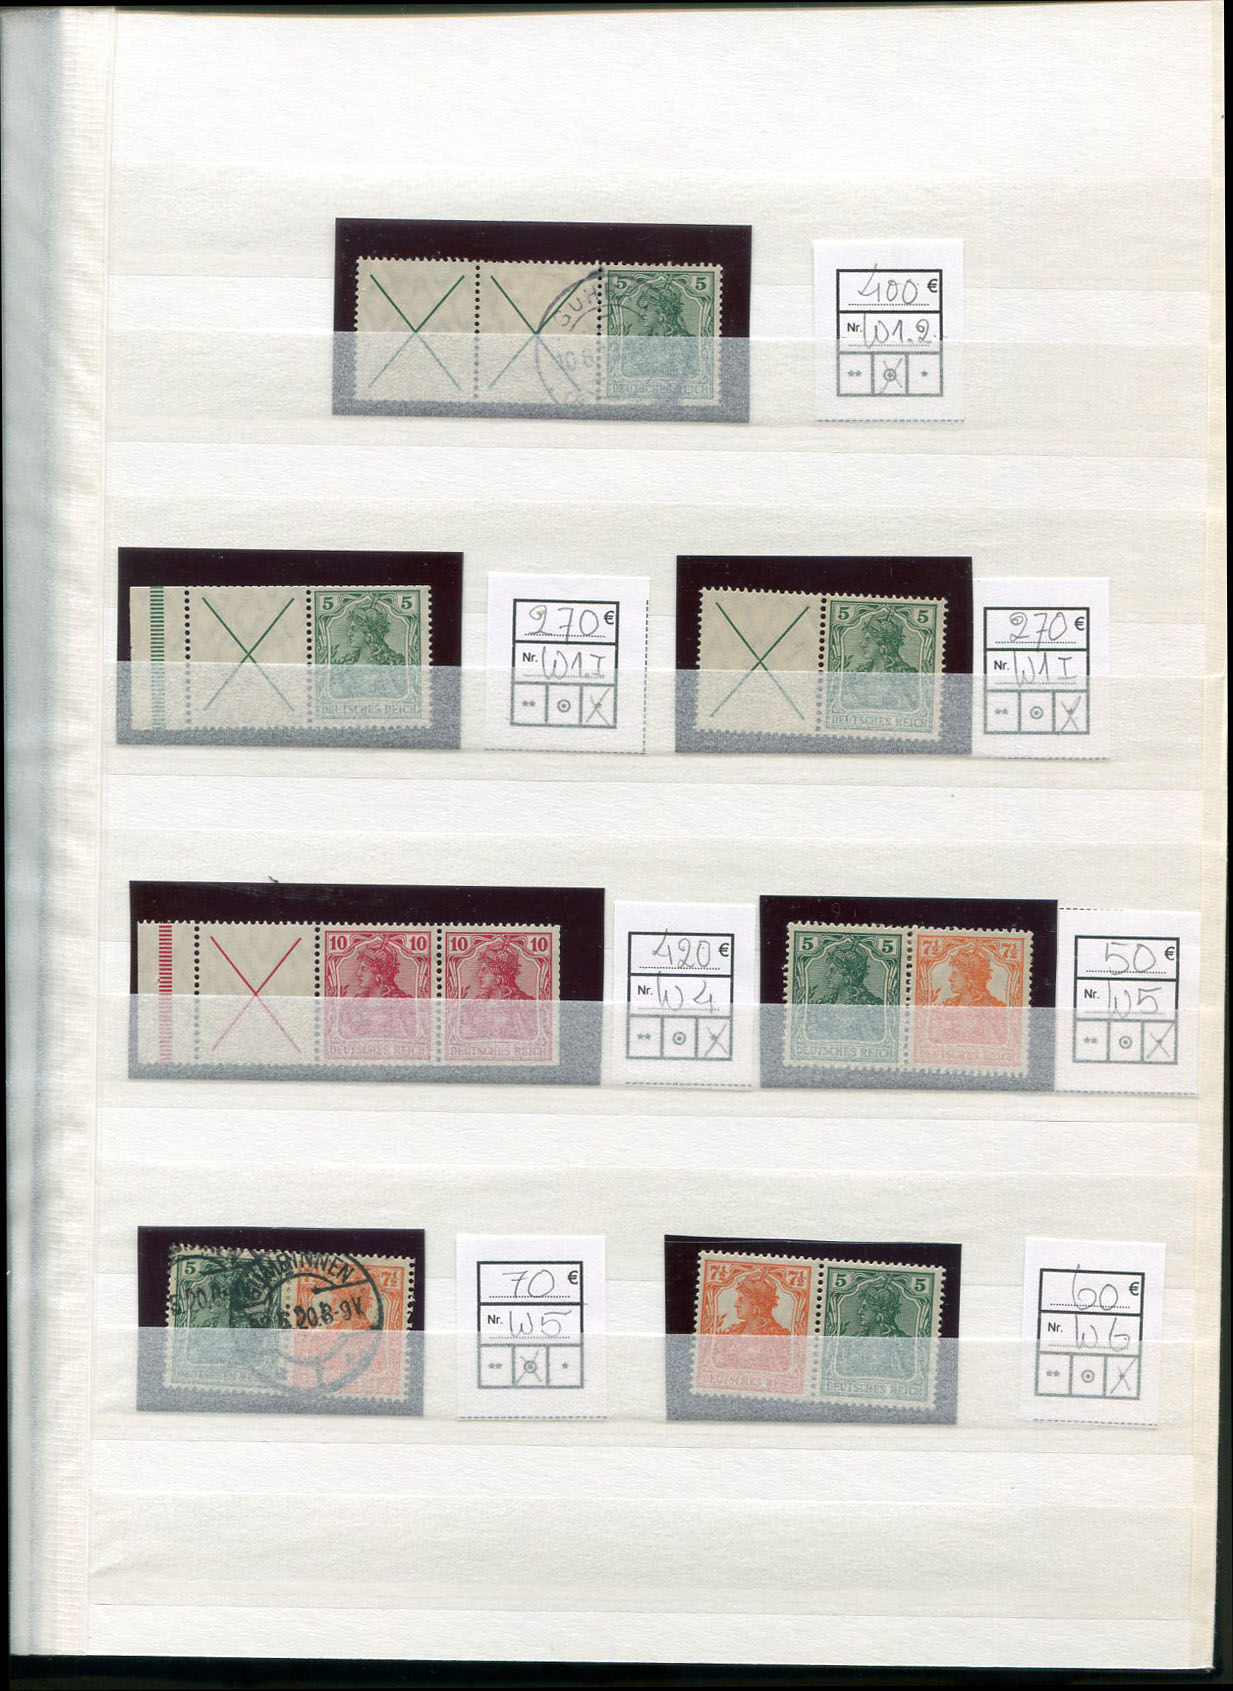 Lot 1450 - LARGE LOTS AND COLLECTIONS LIECHTENSTEIN  -  Cherrystone Auctions U.S. & Worldwide Stamps & Postal History